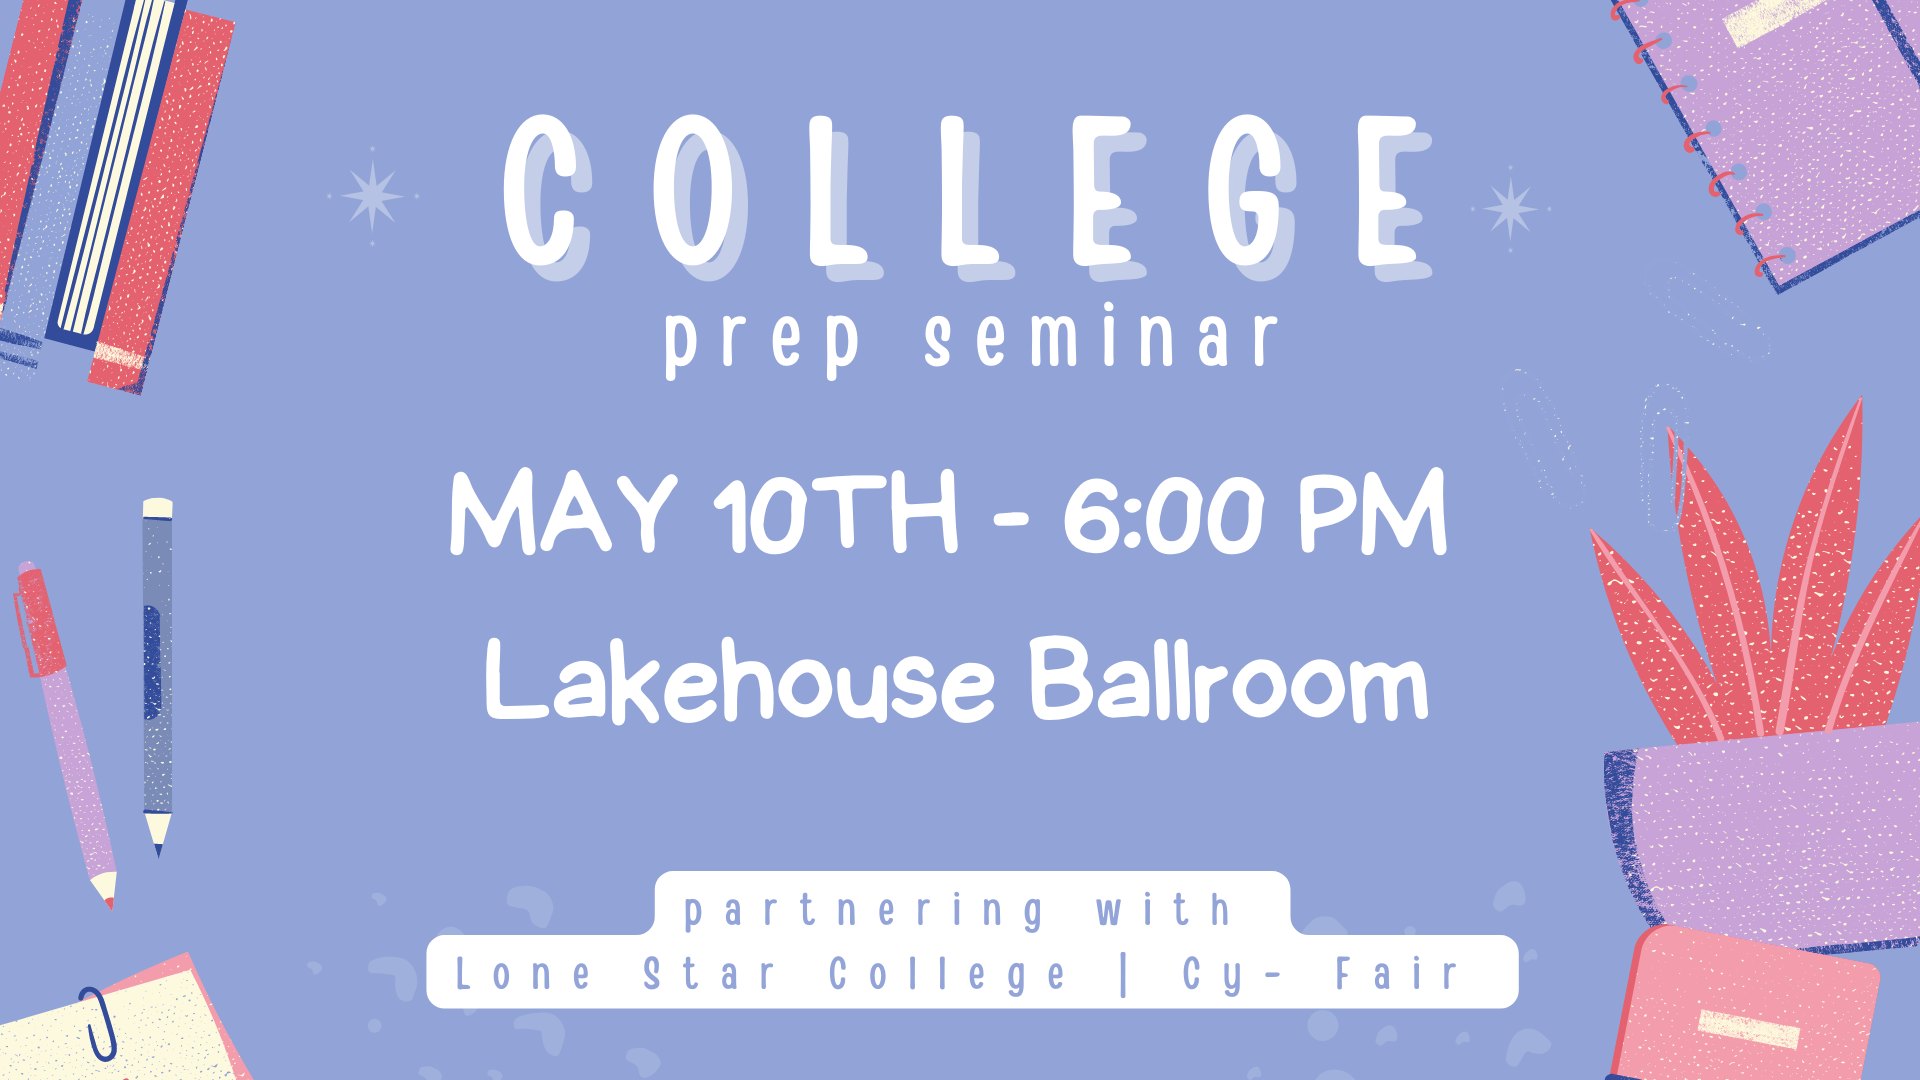 College Prep Seminar with Lone Star College - May 10th